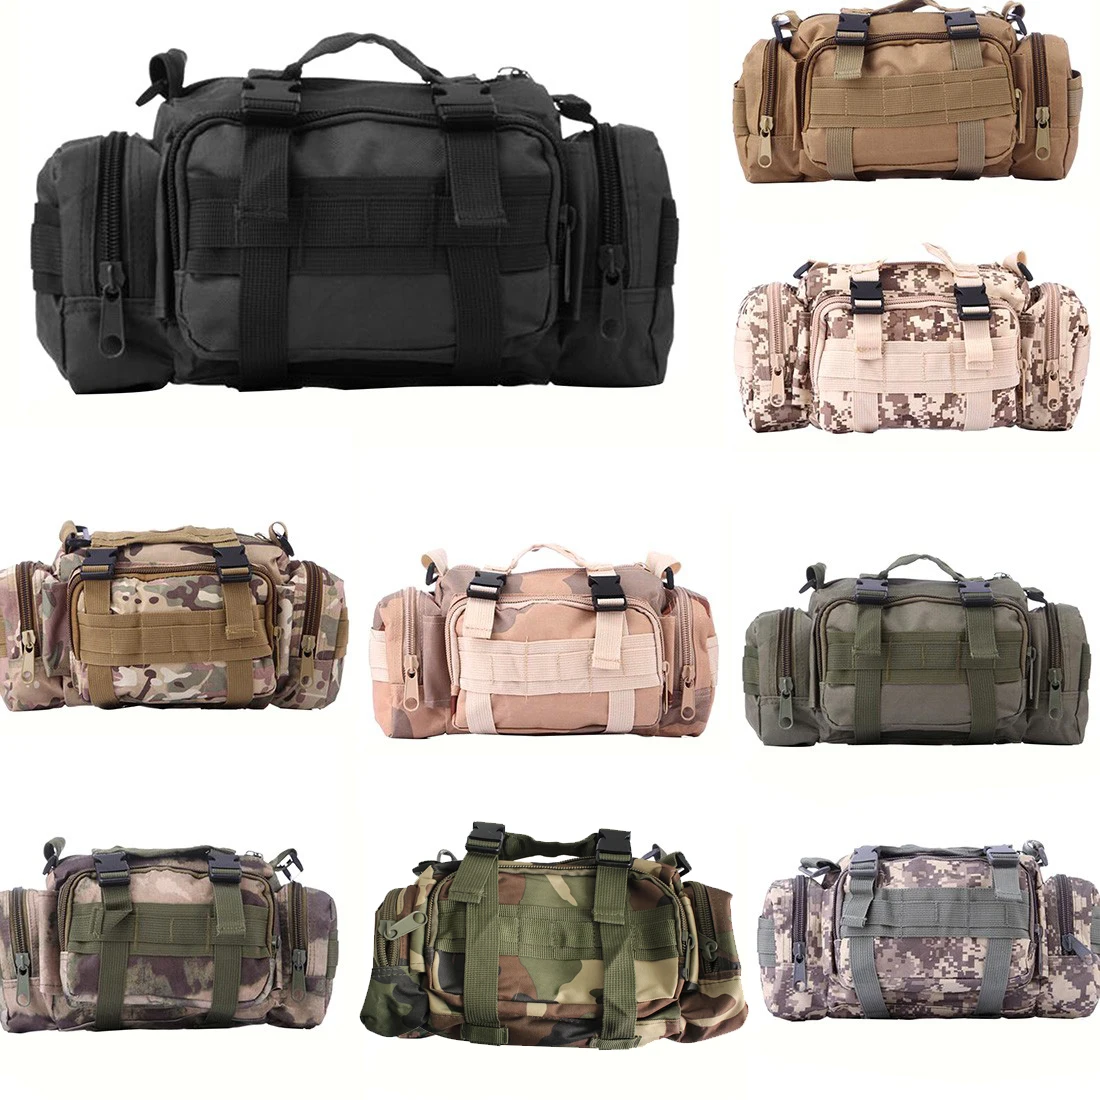 New Military Tactical Waist Bag Outdoor Waterproof Nylon Camping Hiking Backpack Pouch Hand Bag ...